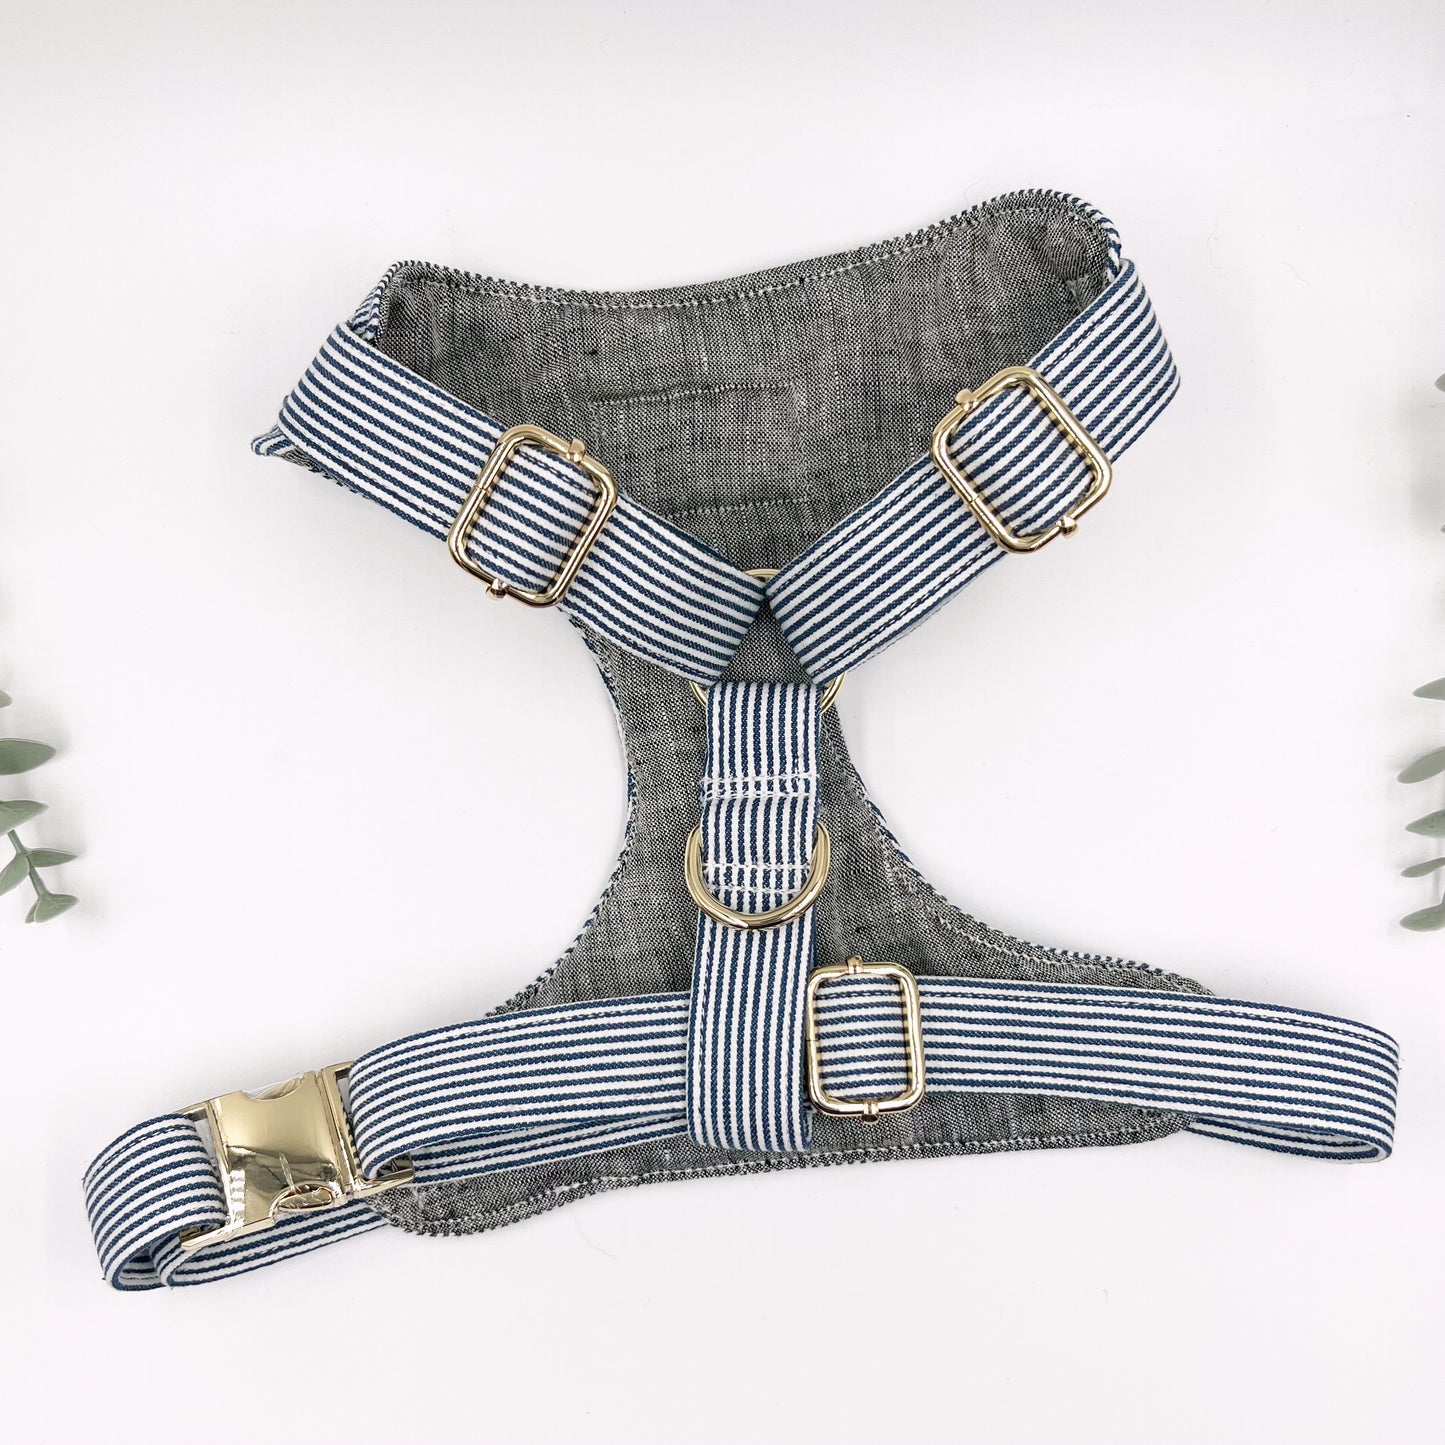 The 'George' Chest Harness